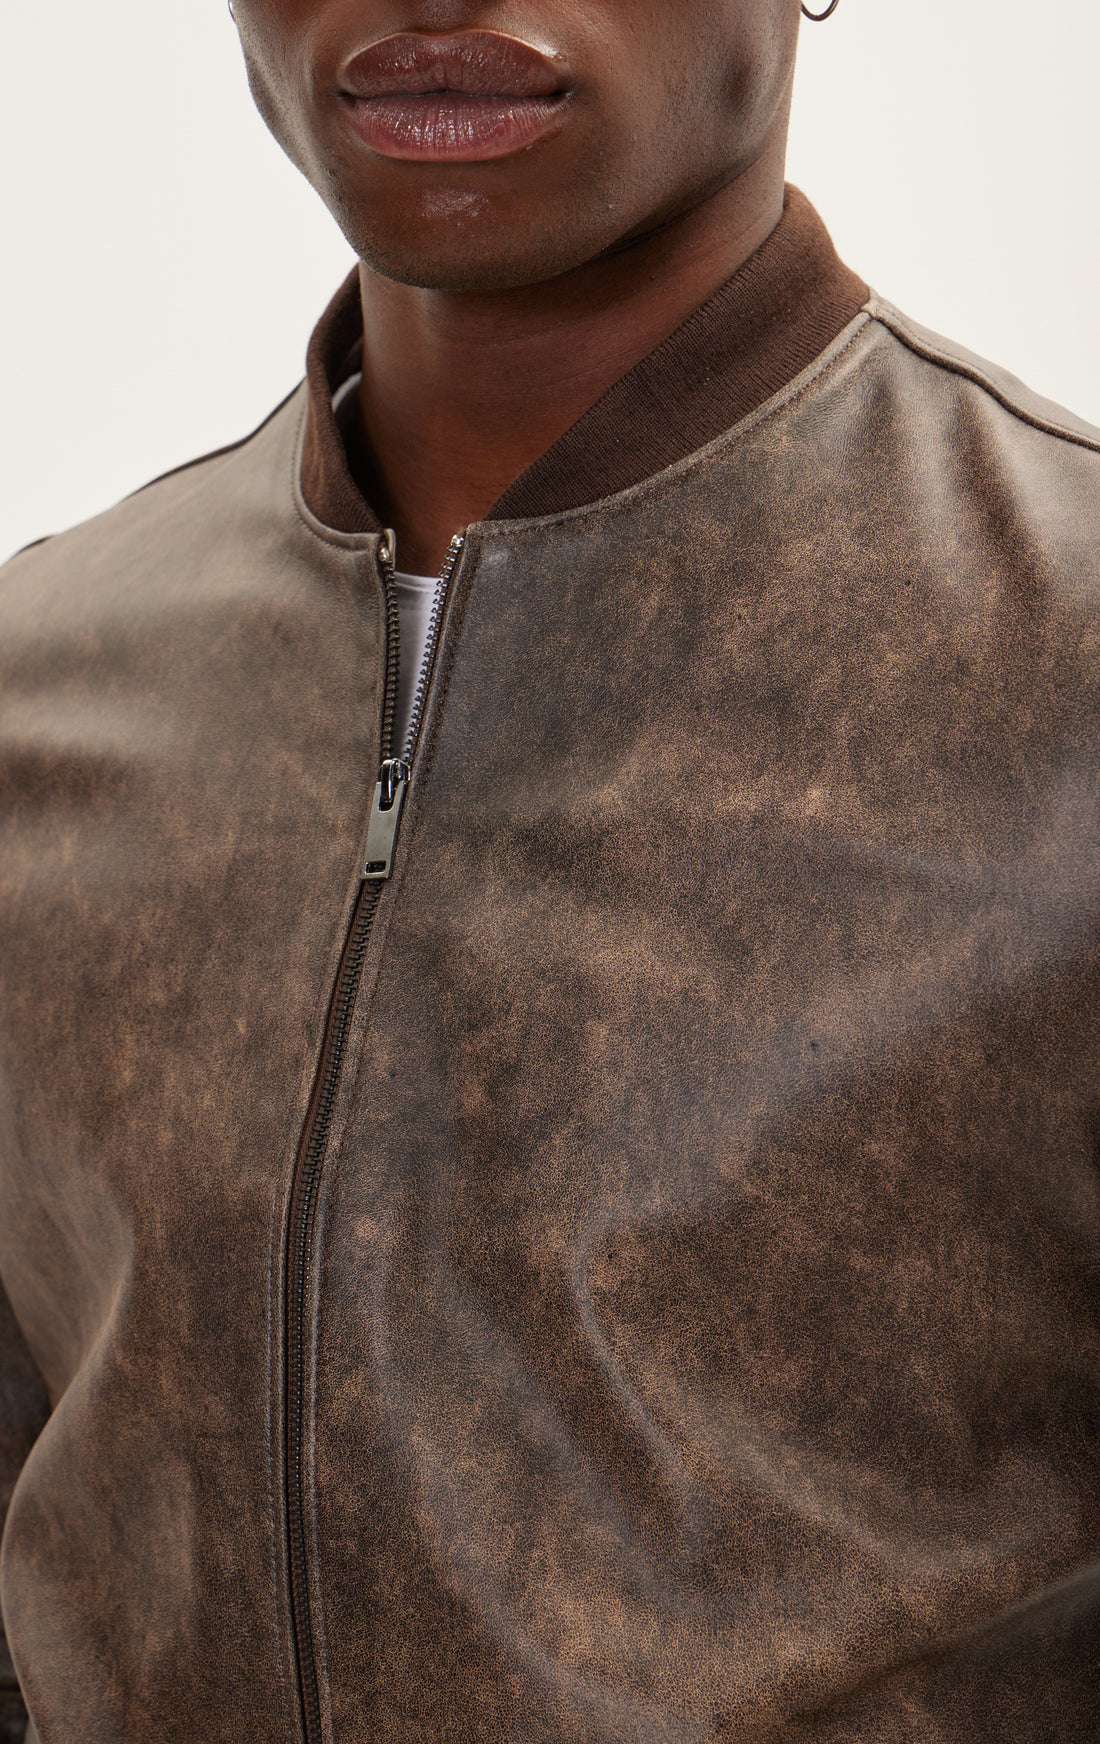 N° 71461 - LEATHER BOMBER - BROWN